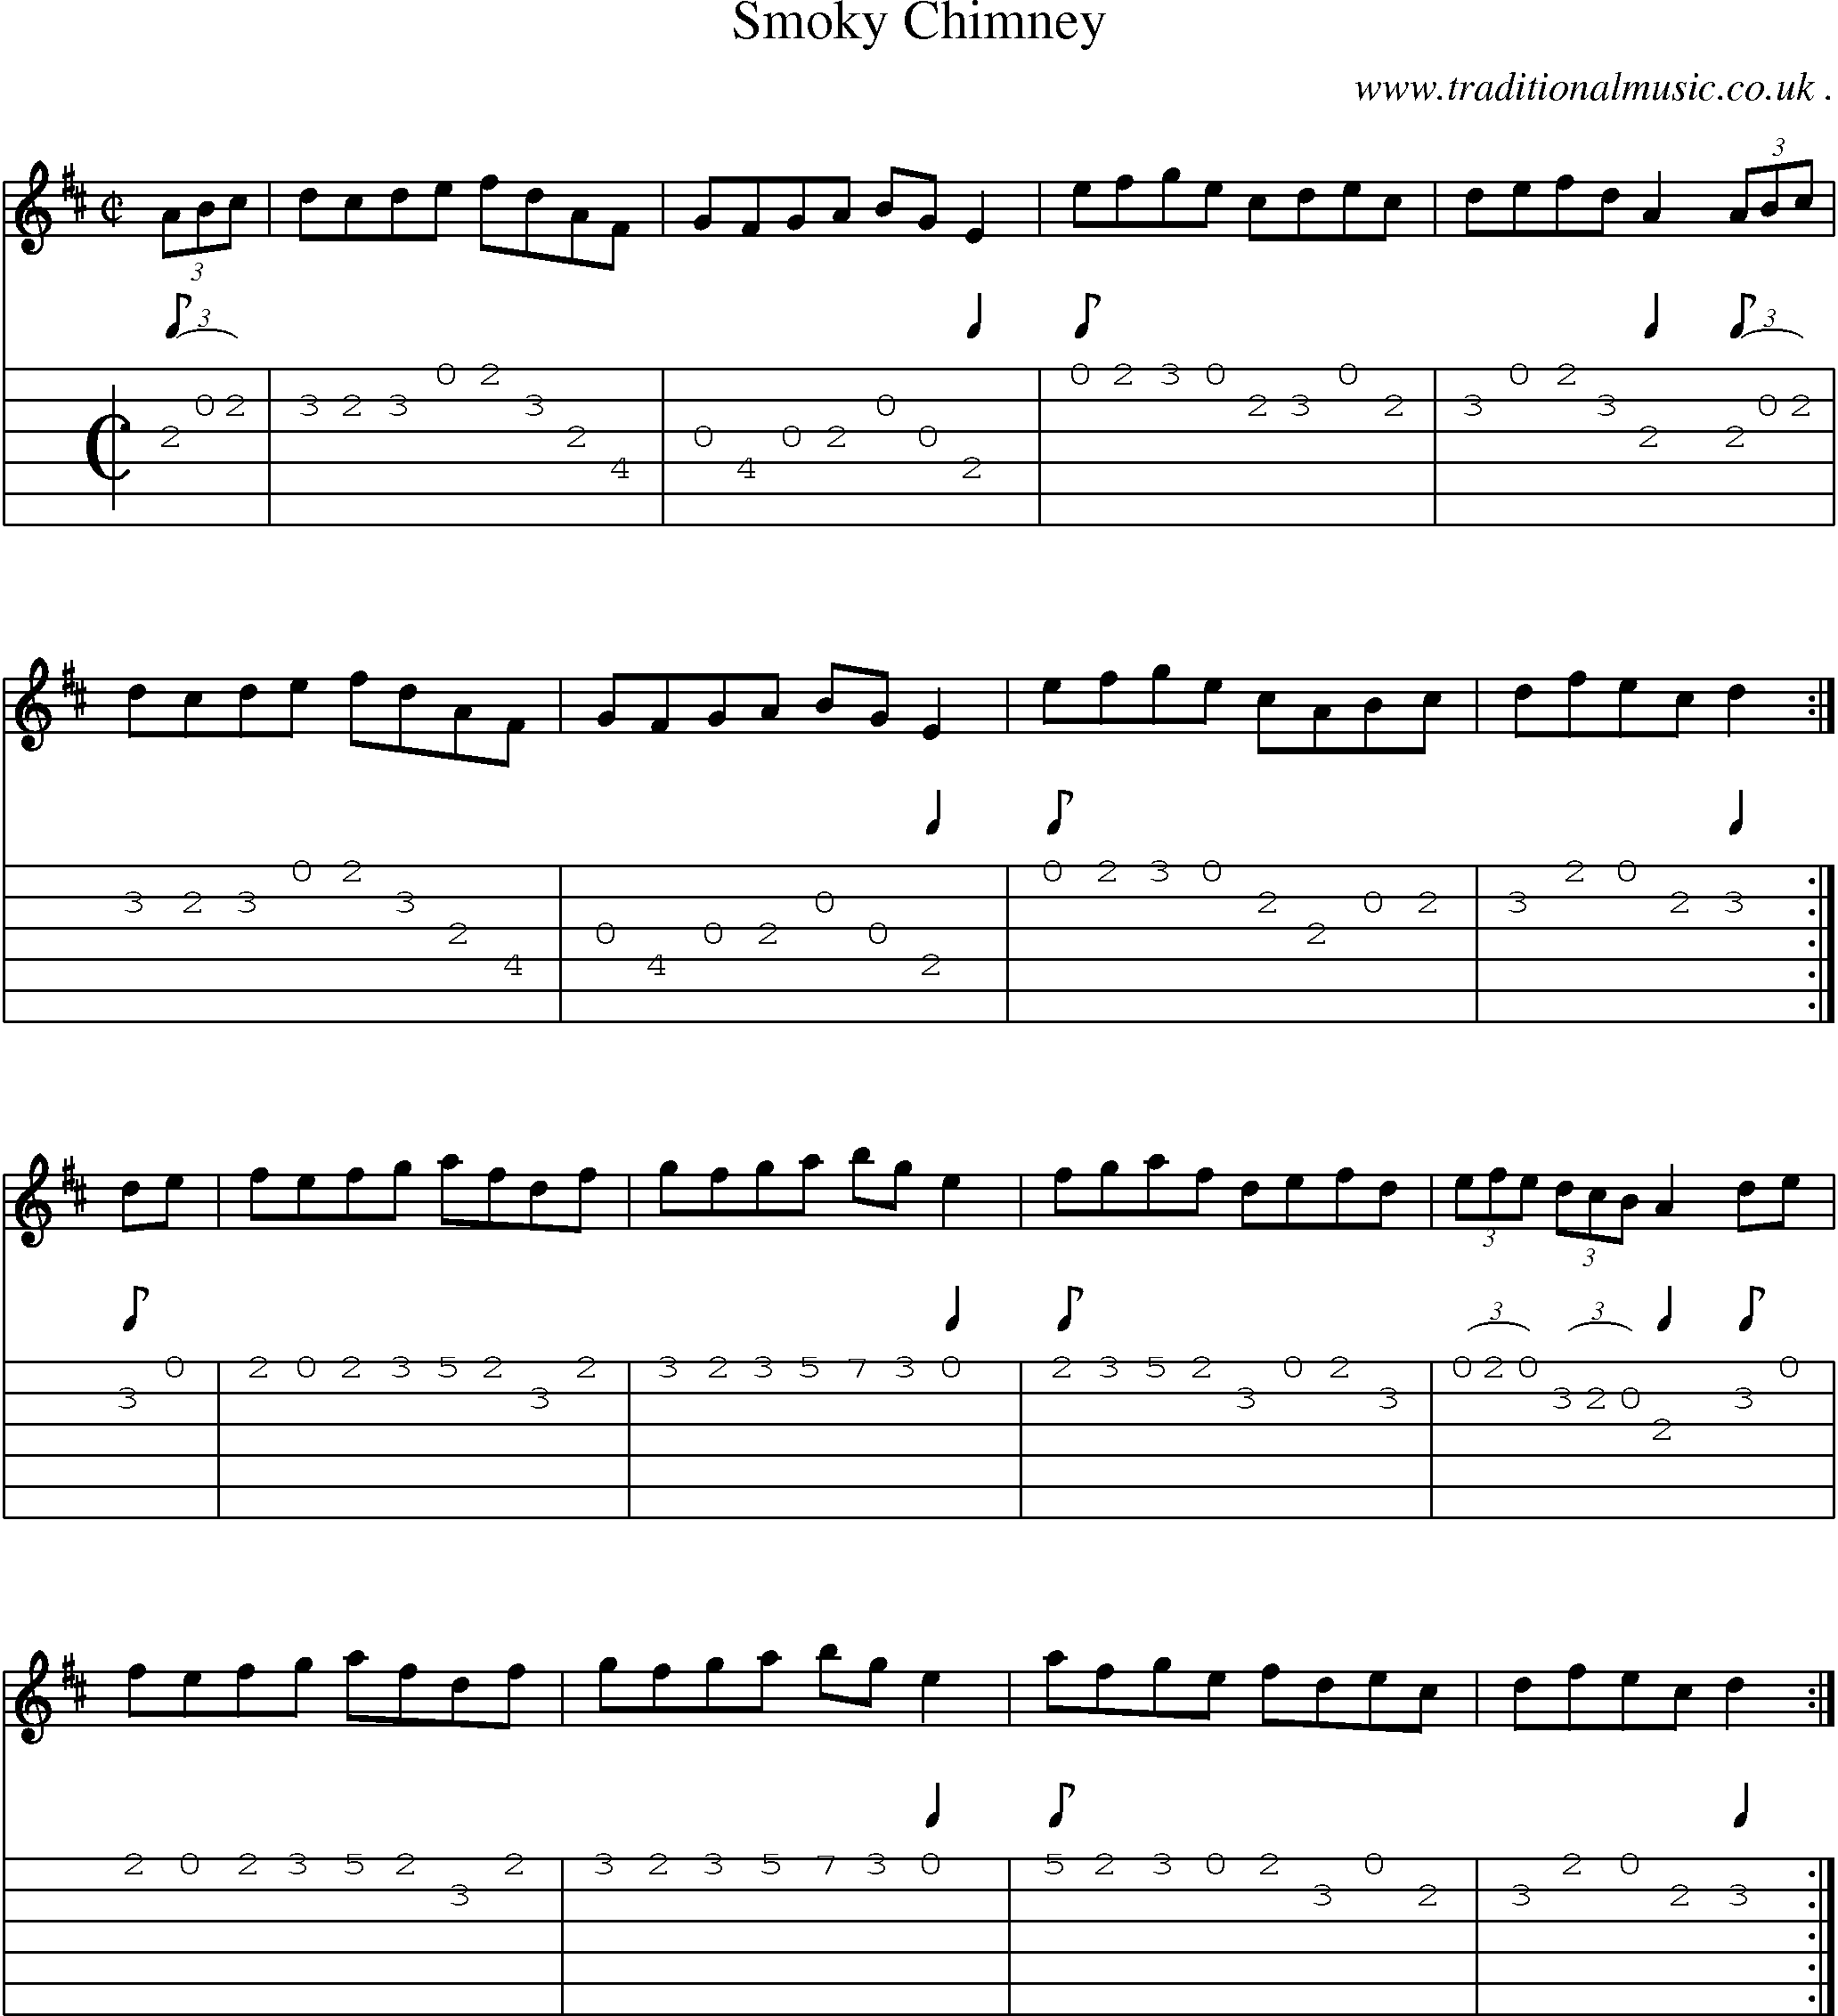 Sheet-Music and Guitar Tabs for Smoky Chimney